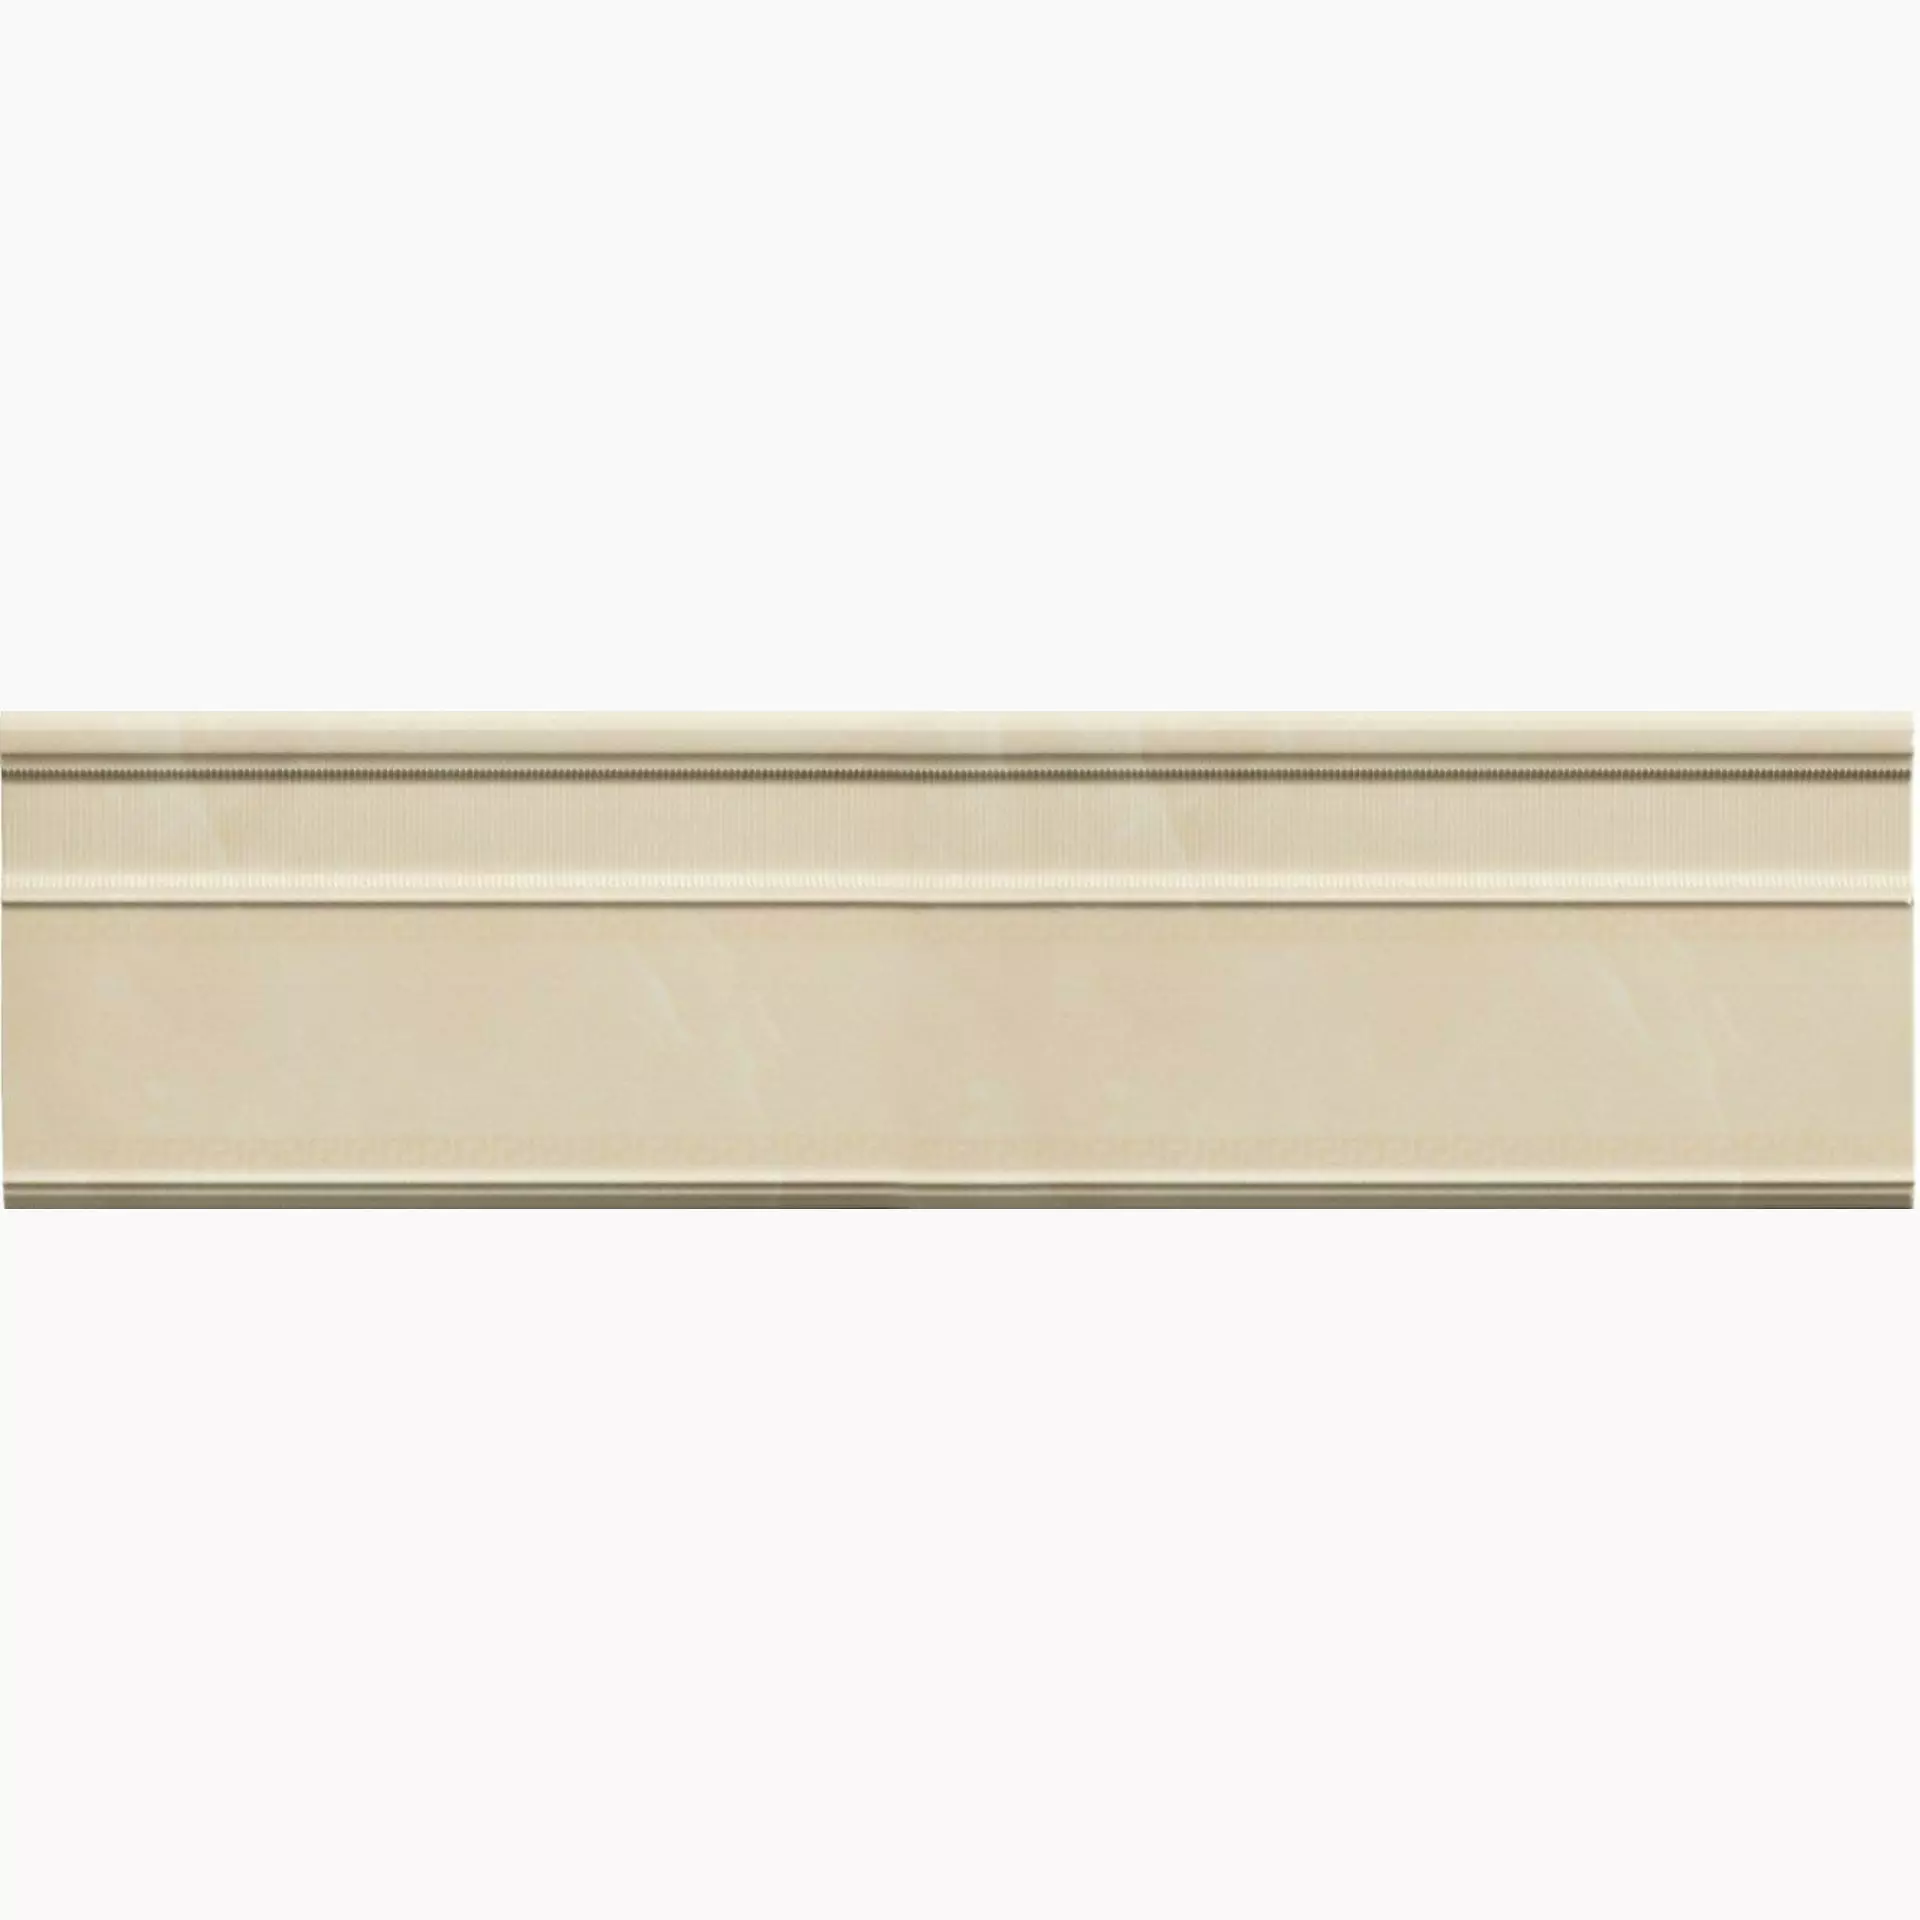 Versace Marble Beige Naturale Skirting board G0240794 15x58,5cm rectified